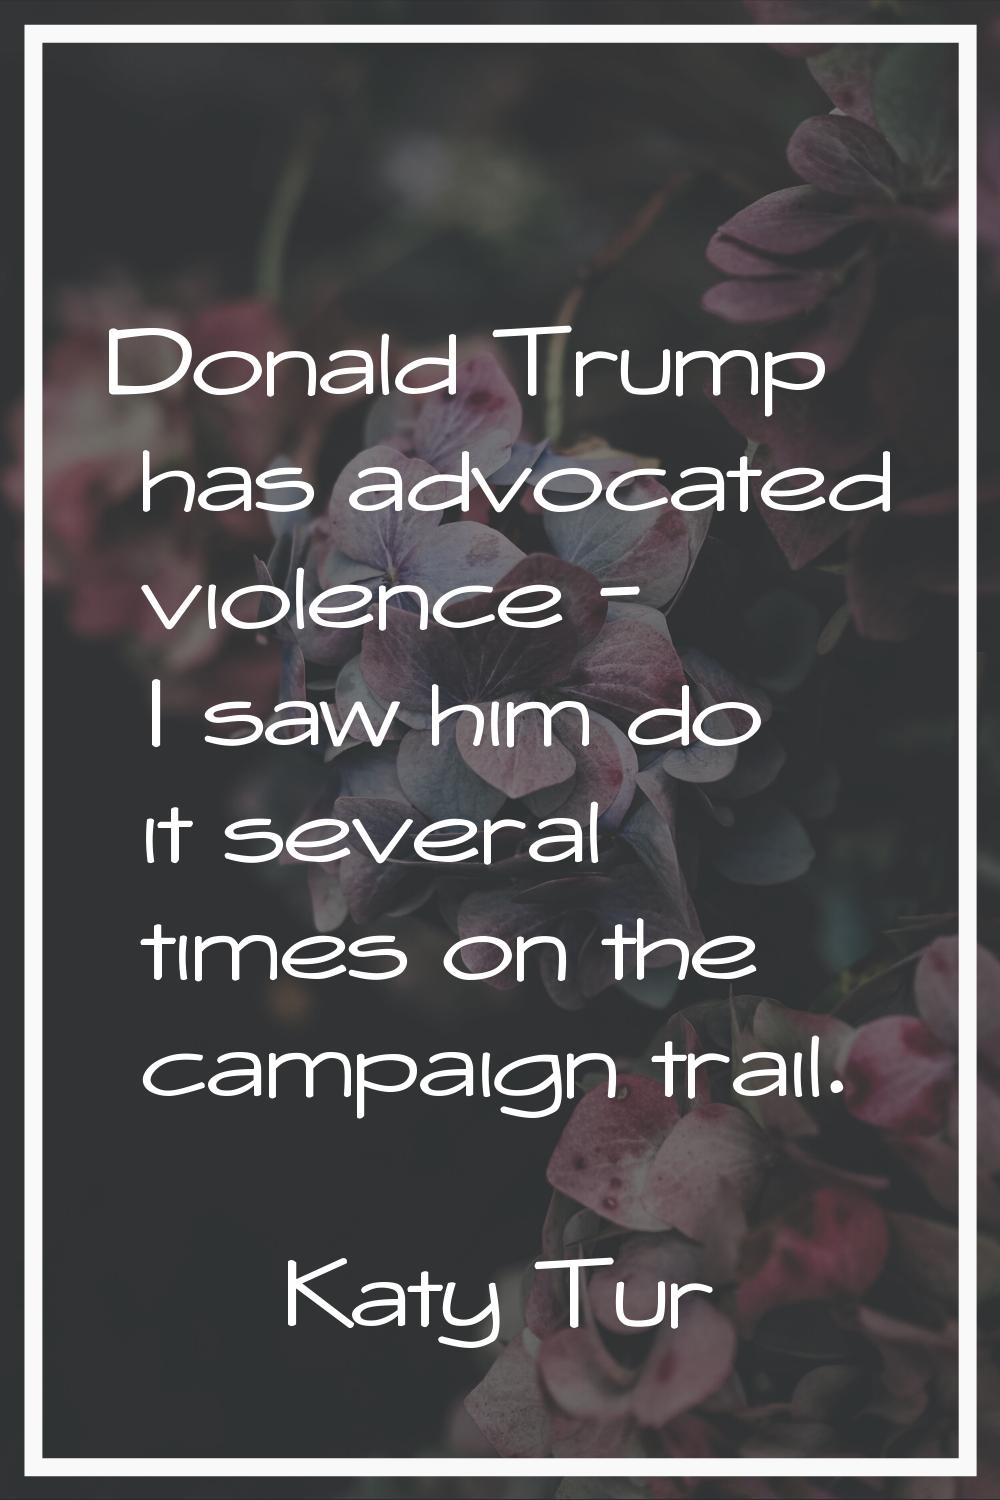 Donald Trump has advocated violence - I saw him do it several times on the campaign trail.